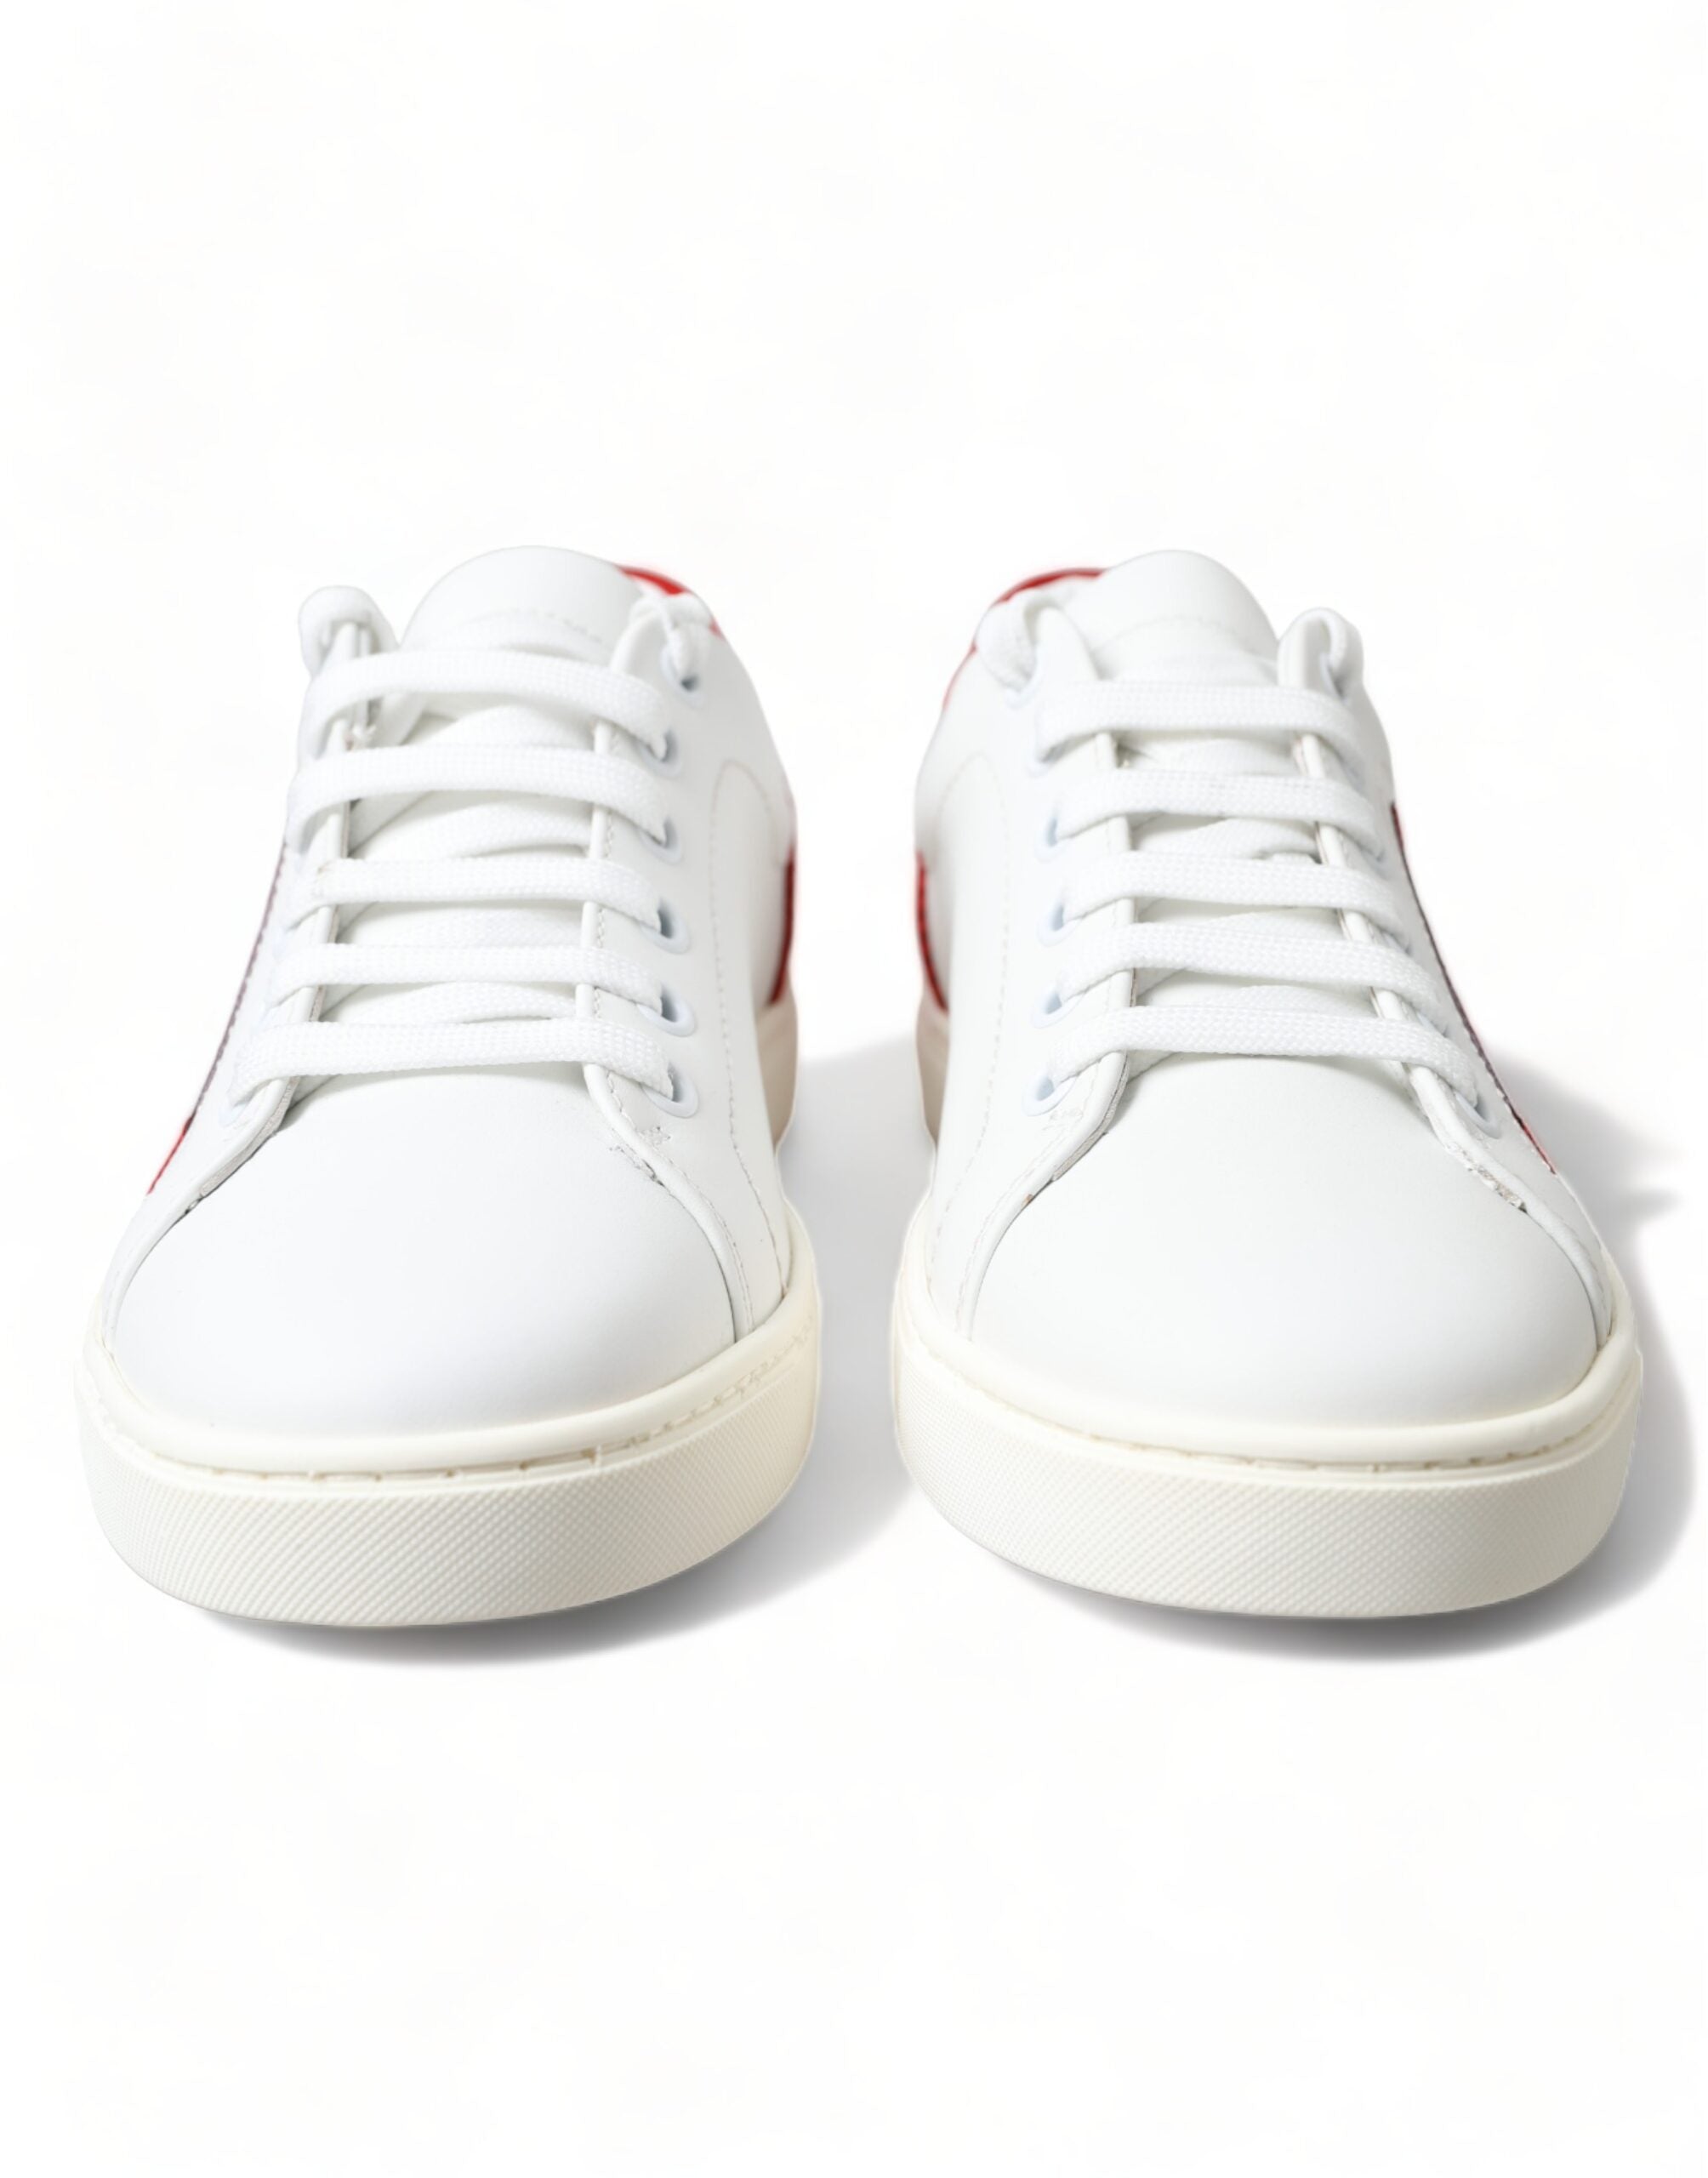 Chic White Leather Sneakers with Red Accents